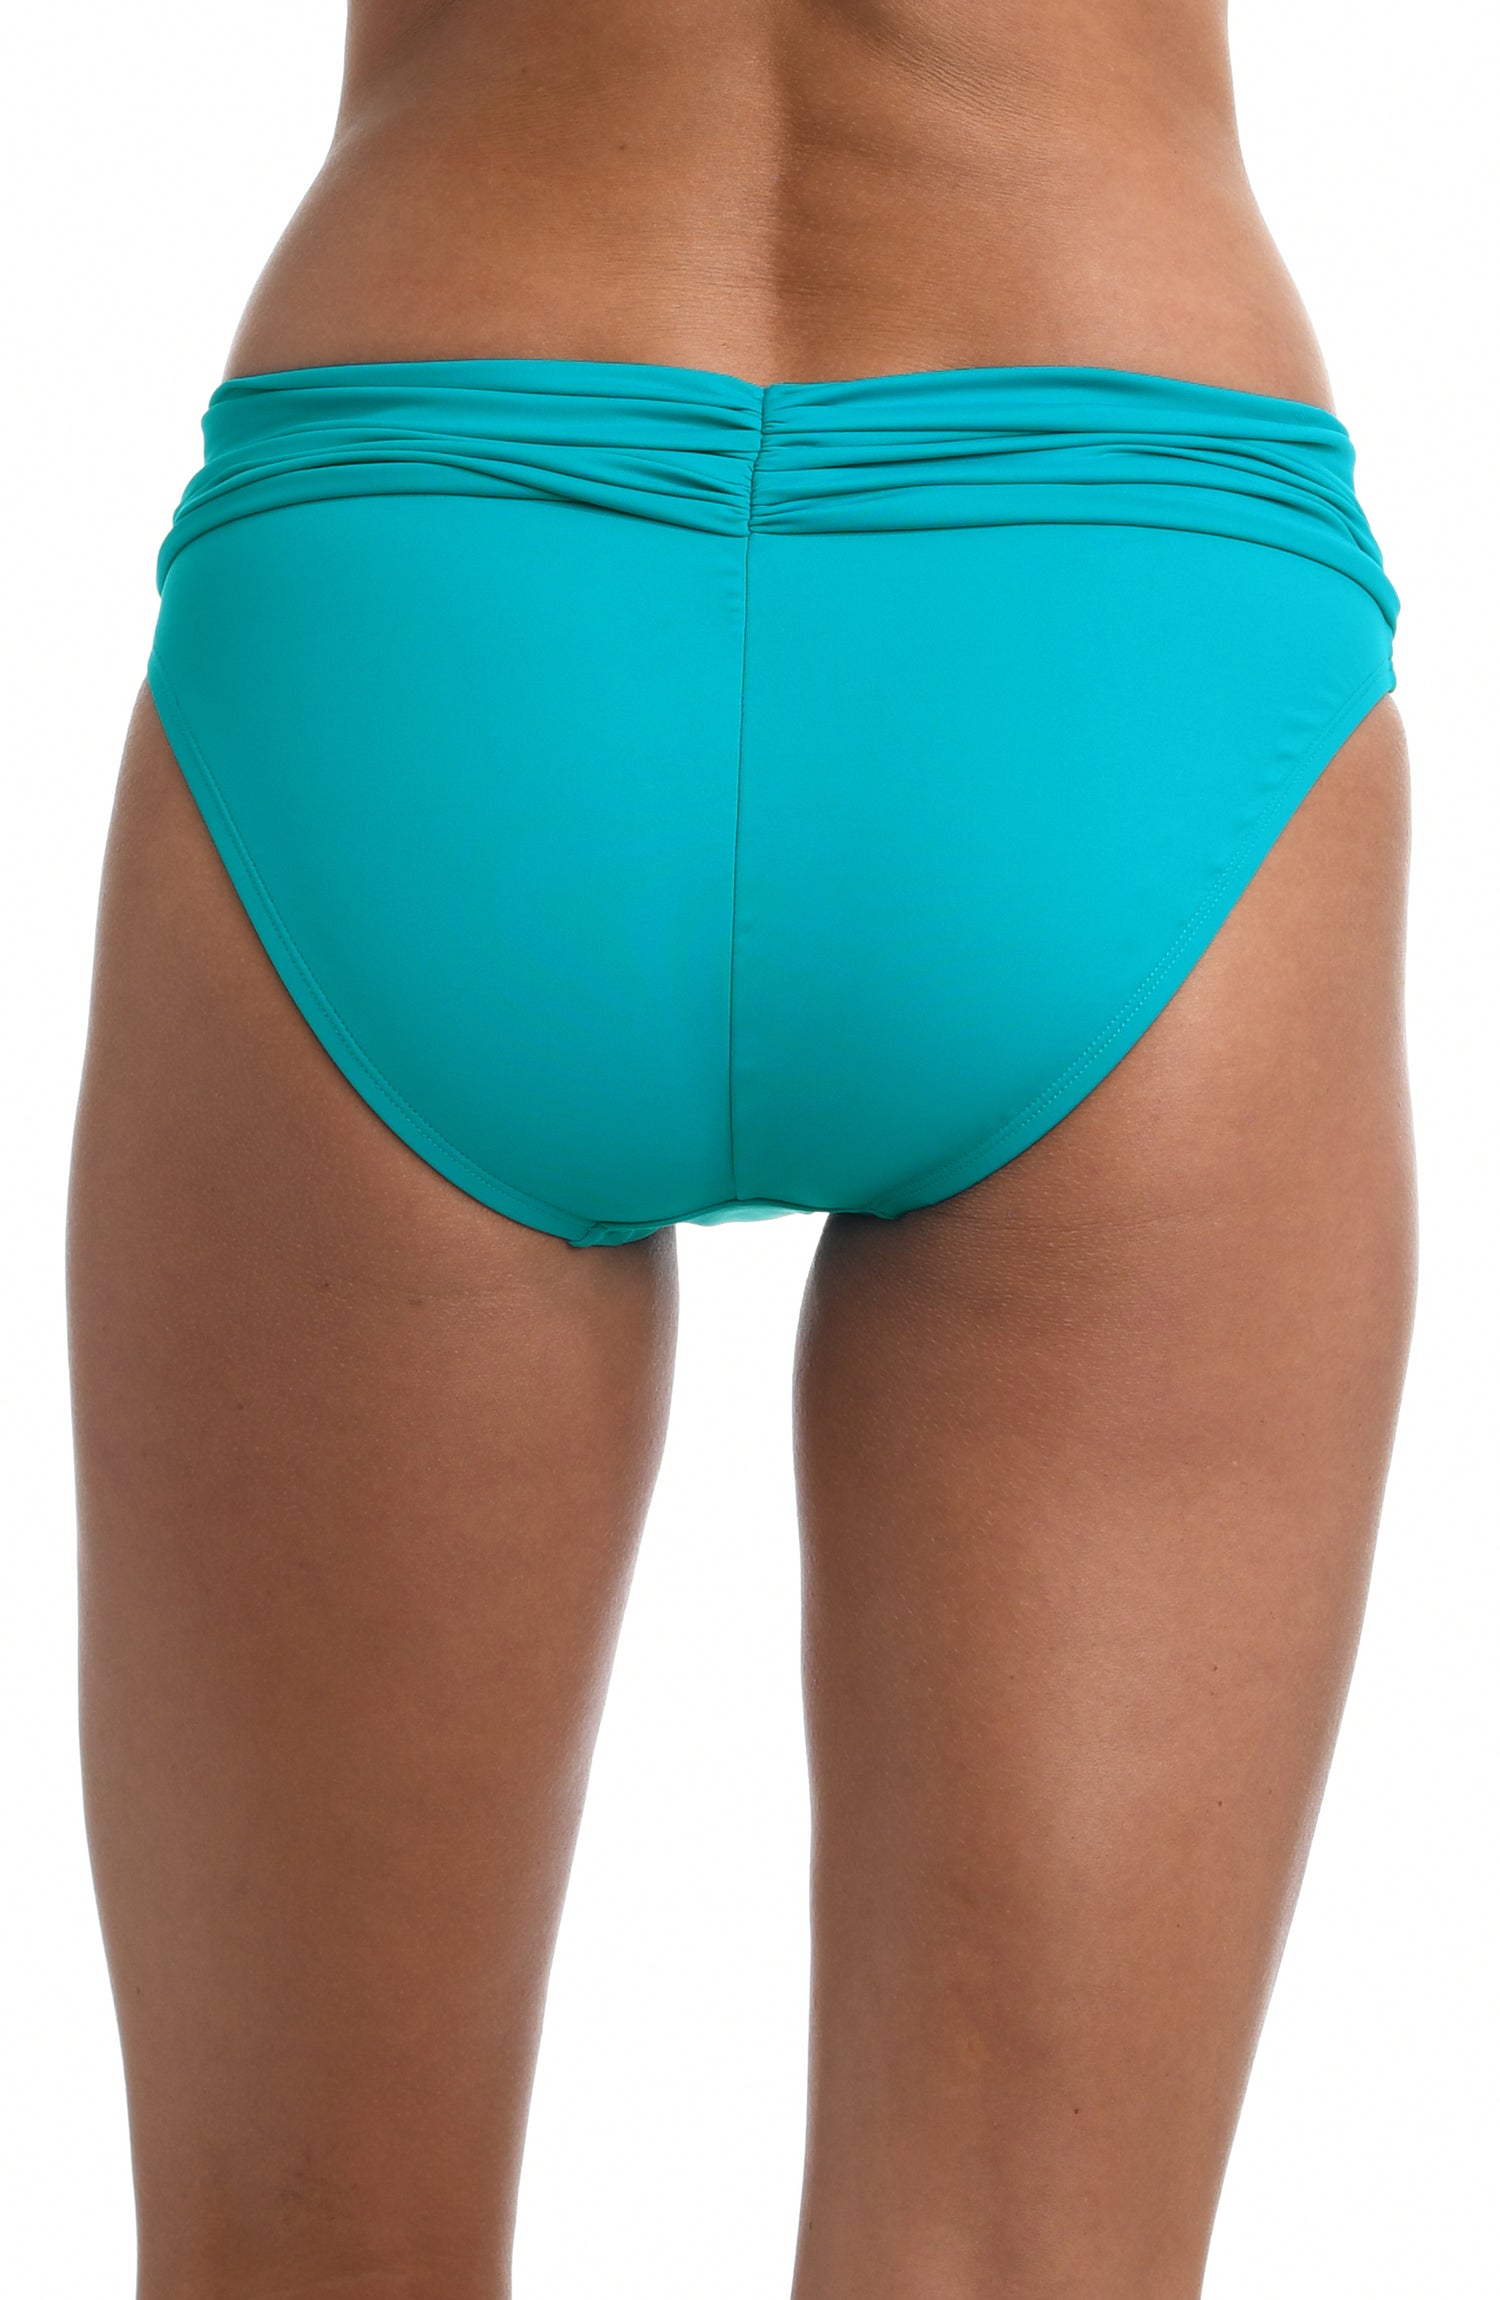 Model is wearing a turquoise colored shirred hipster swimsuit bottom from our Best-Selling Island Goddess collection.